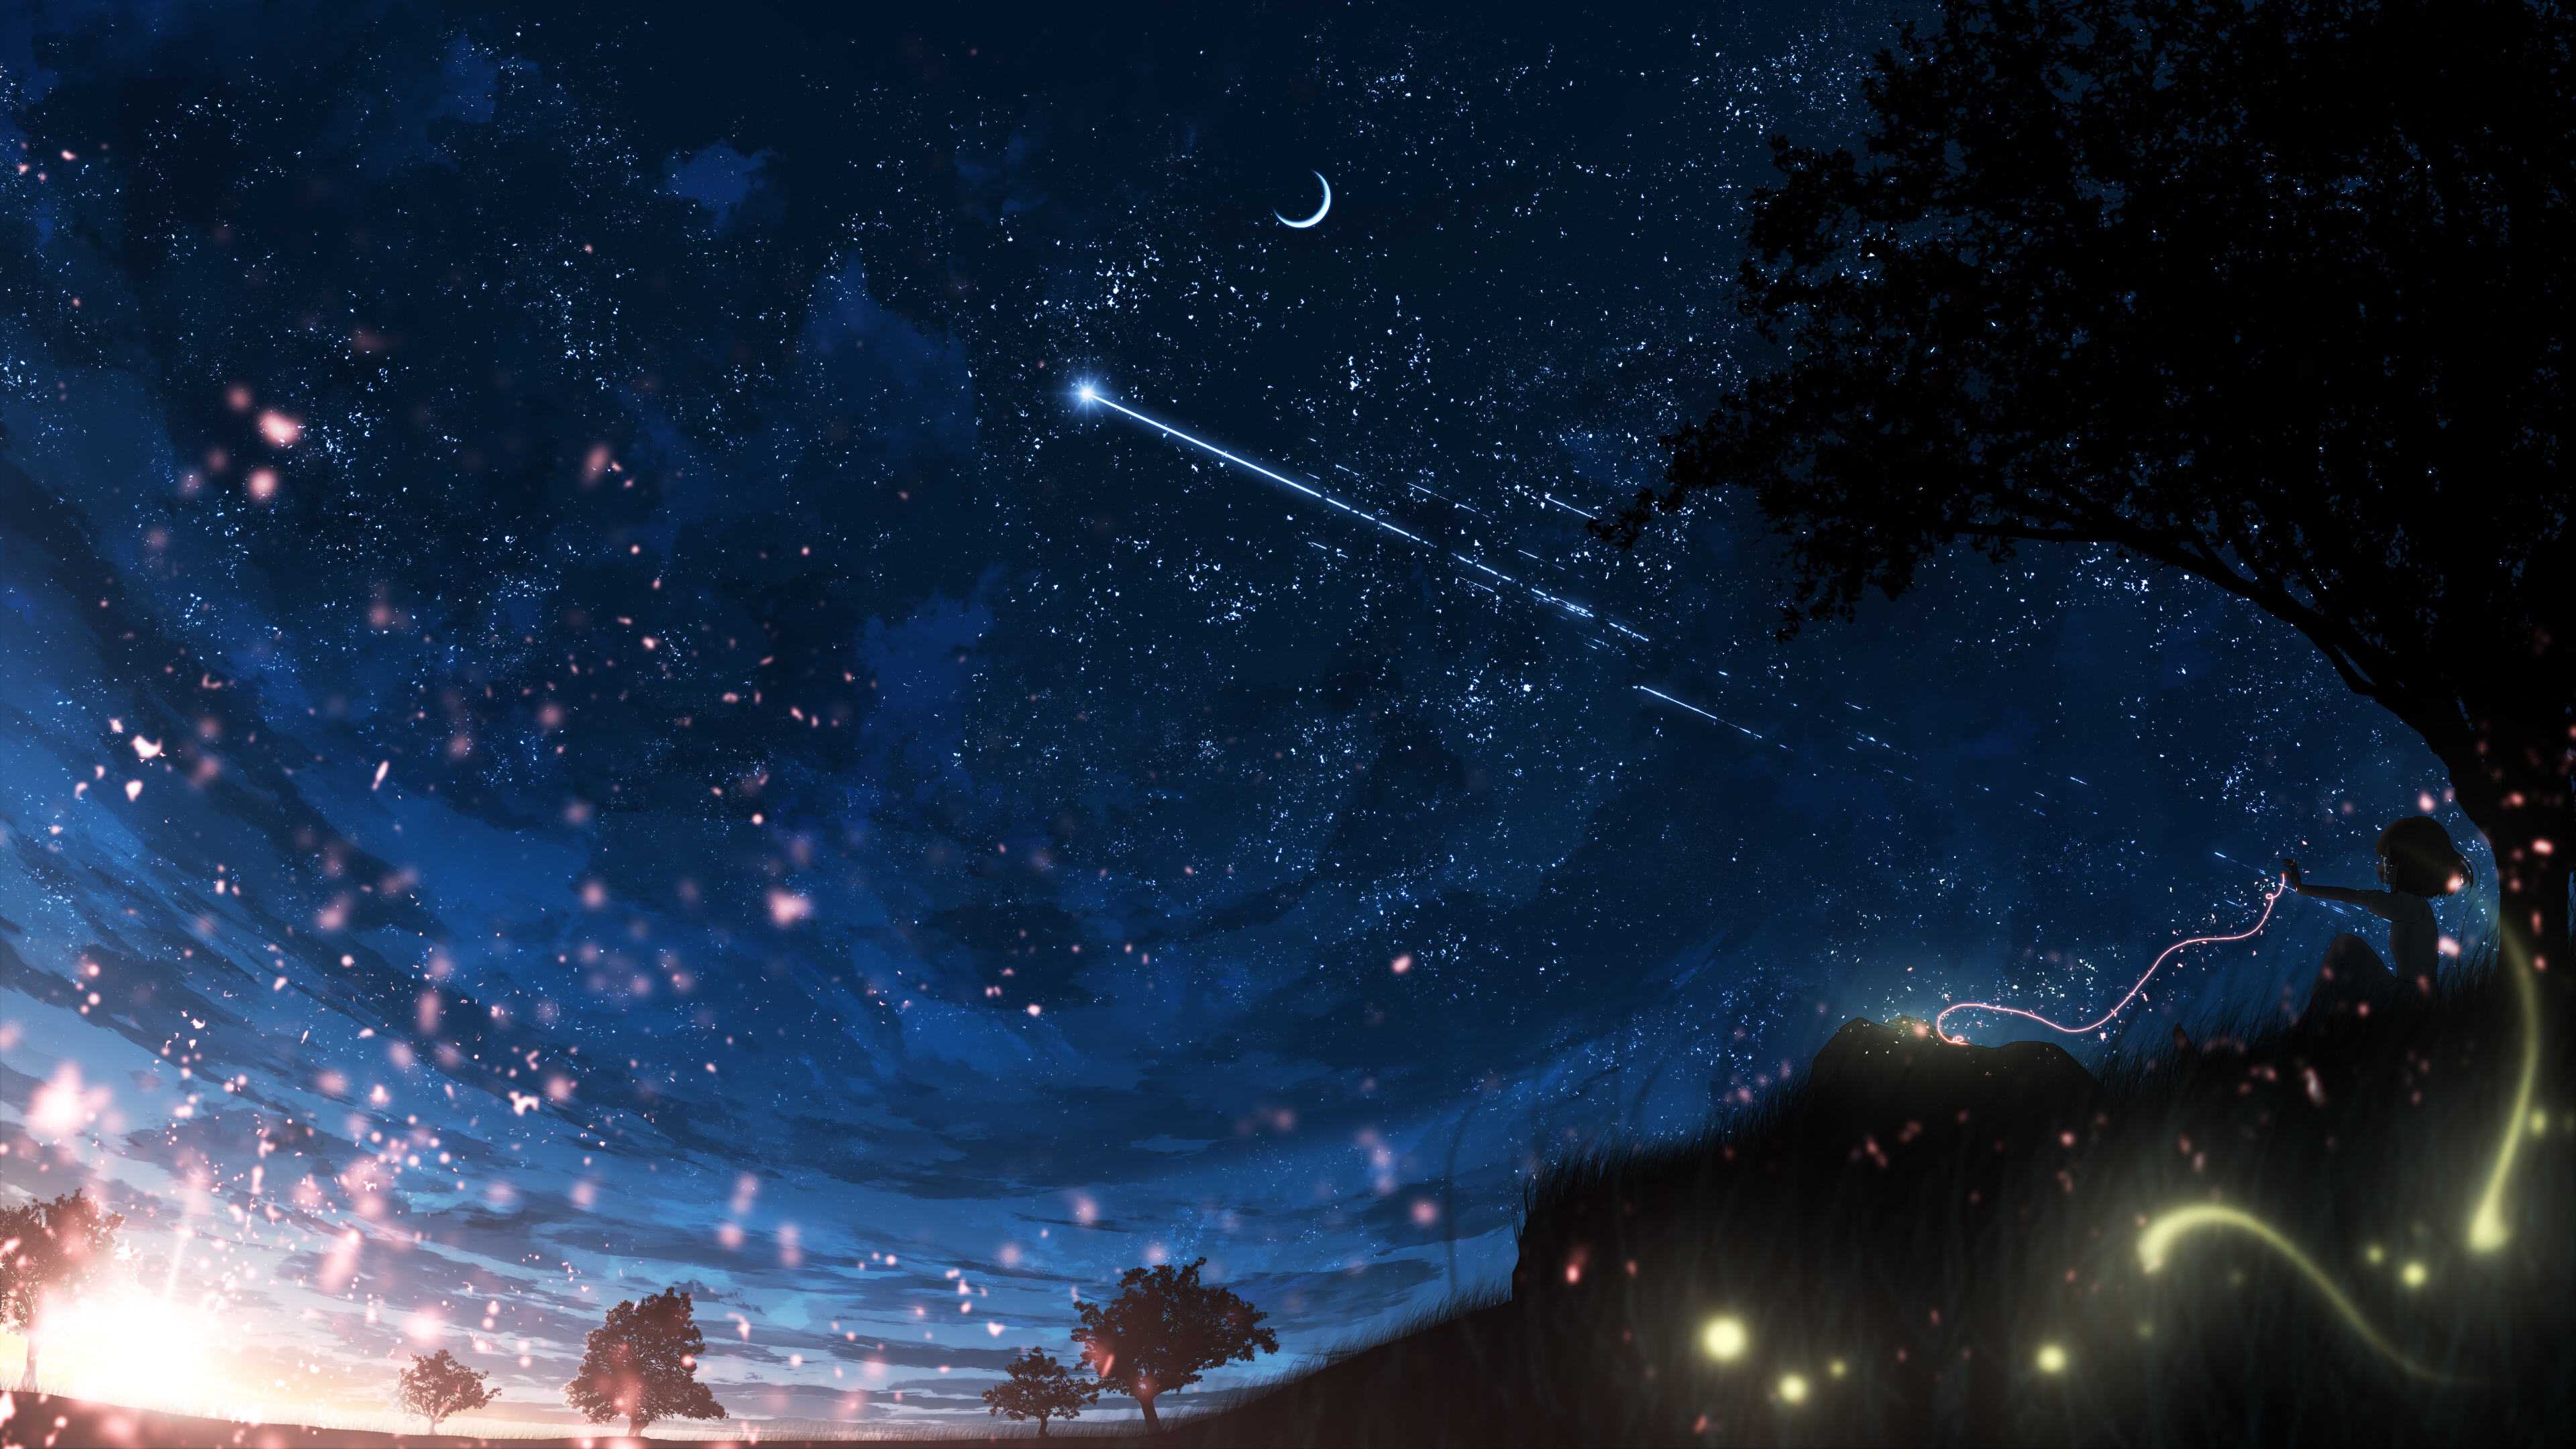 160 4k Starry Sky Wallpapers Background Images